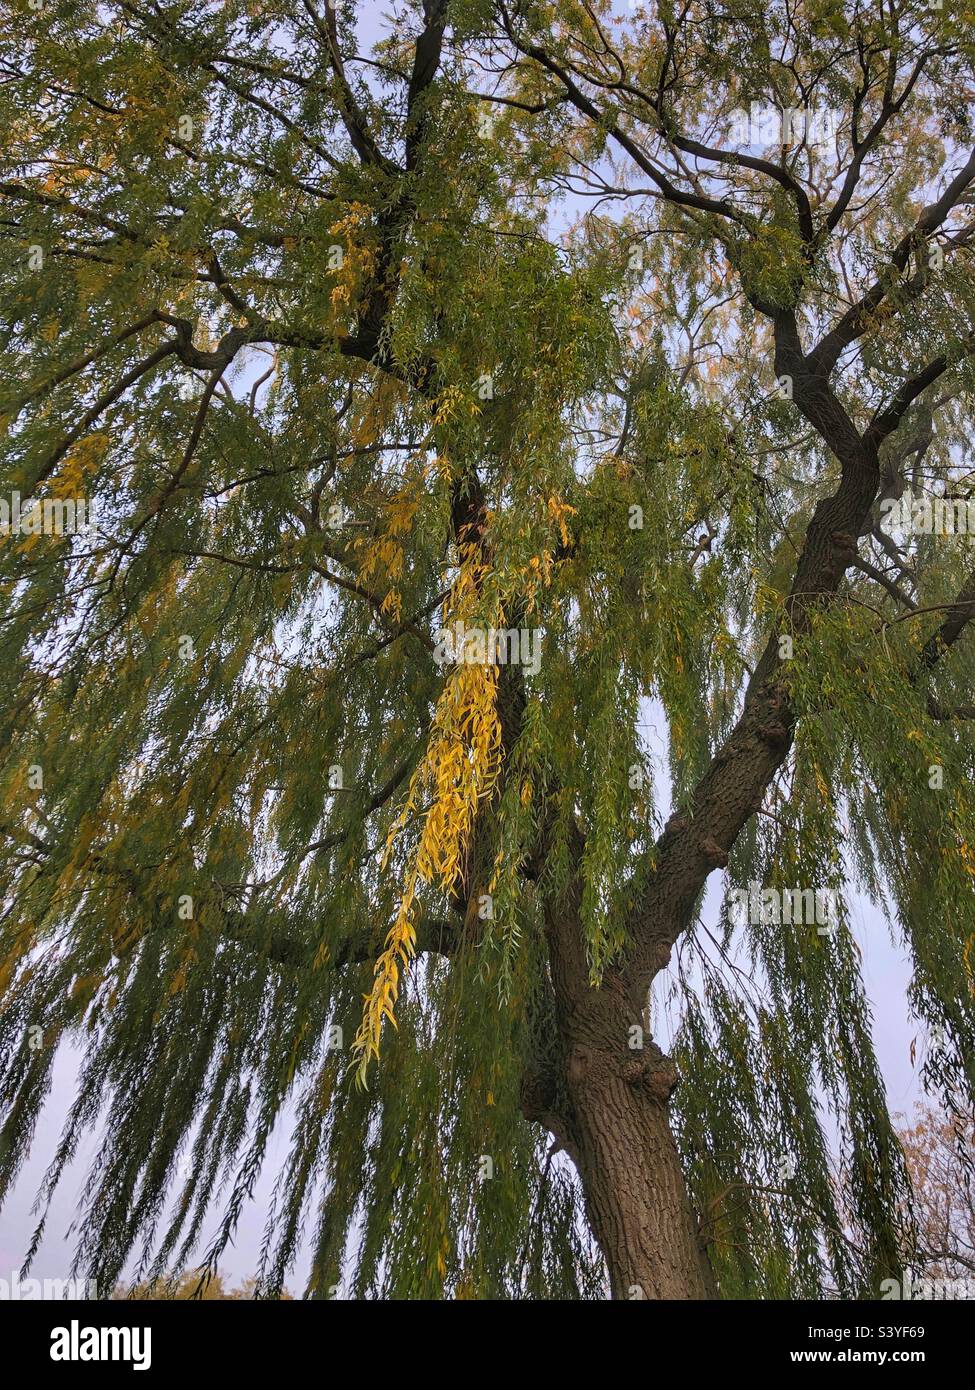 Looking up into a willow tree in autumn. Stock Photo